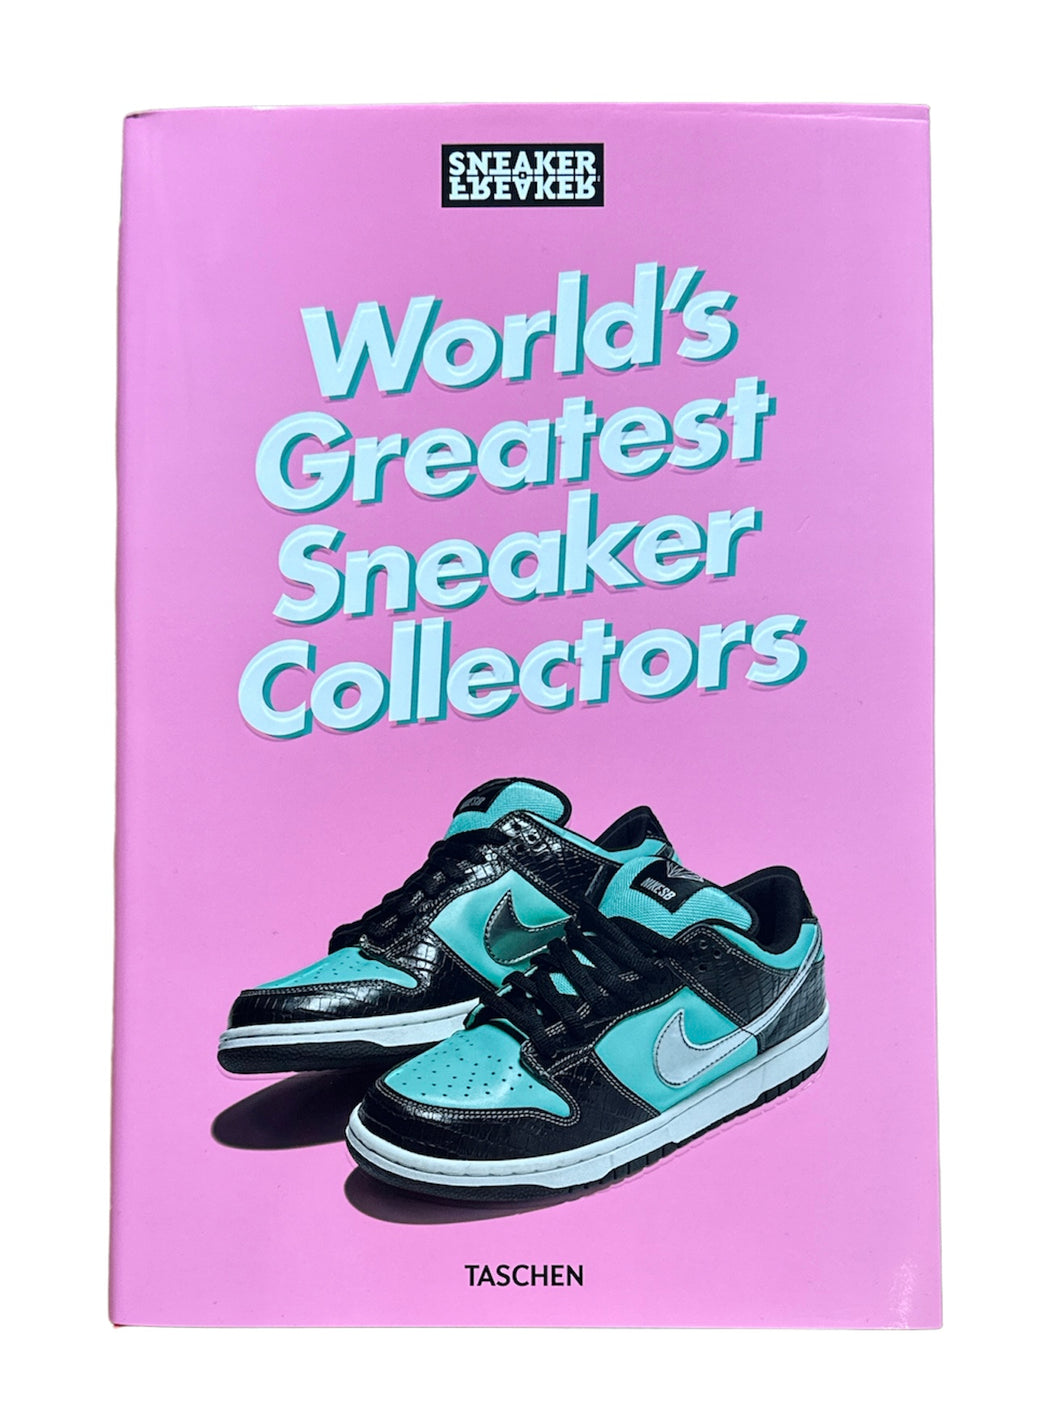 LAST ONE IN STOCK! - Friends and Family Edition of World’s Greatest Sneaker Collectors (1 of 500 individually numbered)